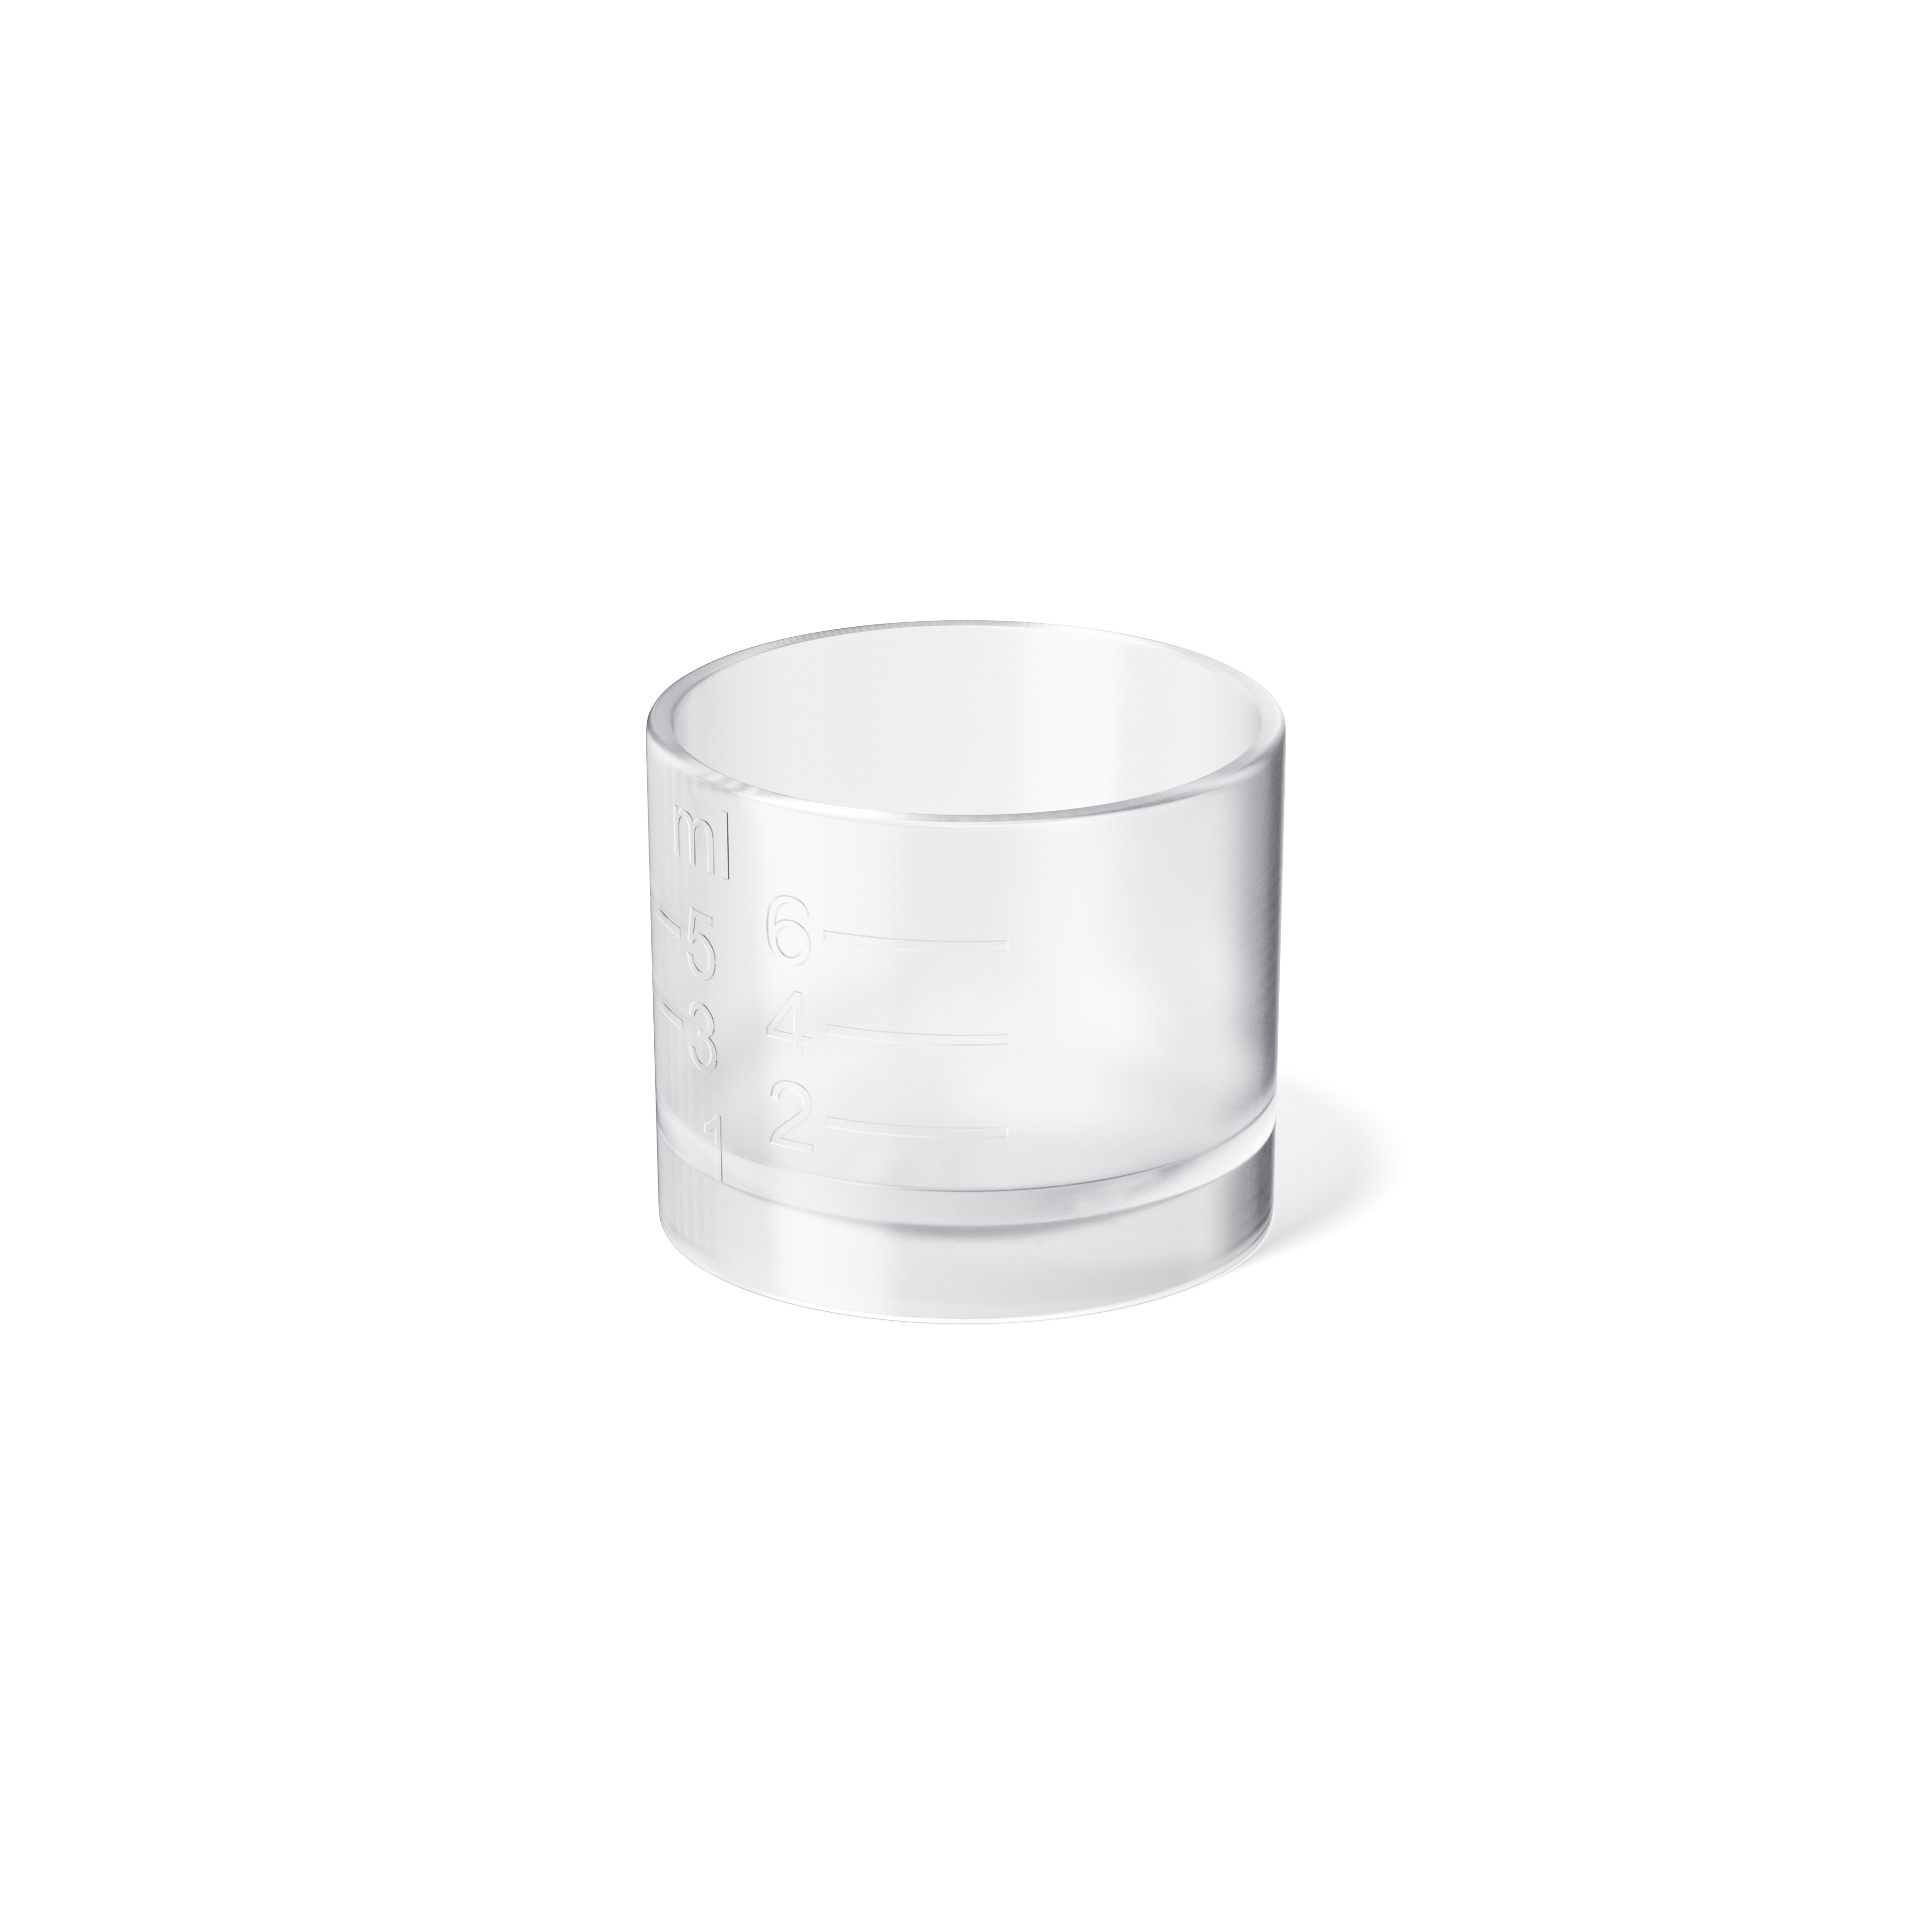 Dosing cup 6ml for OVIII caps